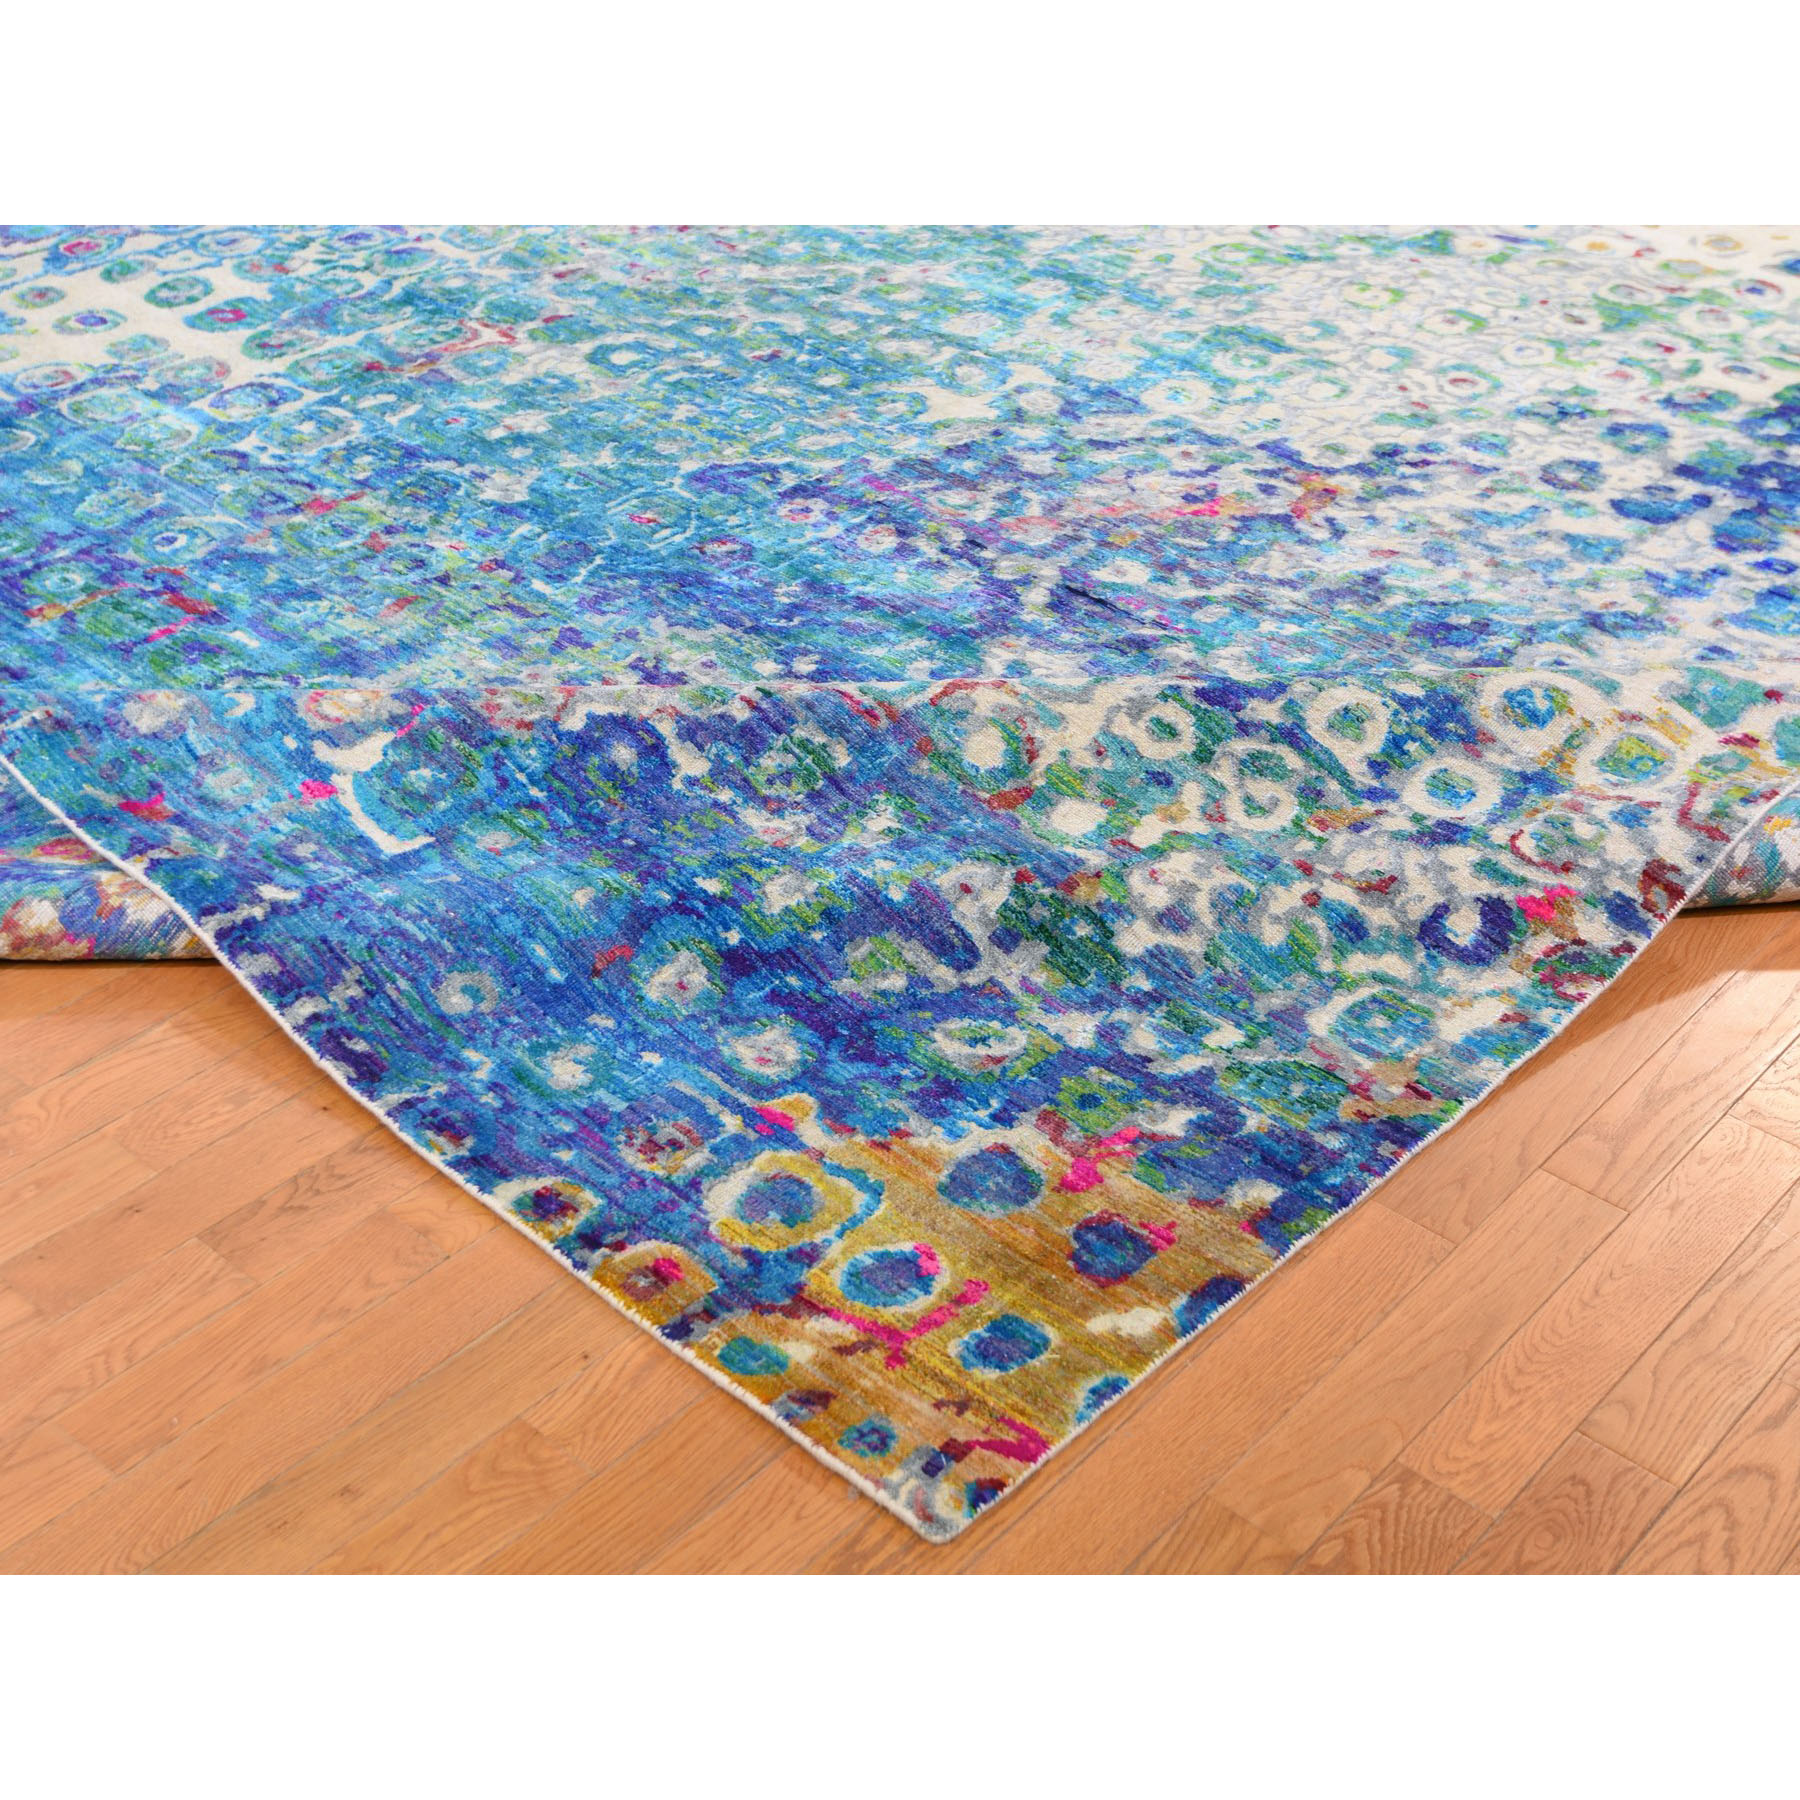 11-10 x15- THE PEACOCK, Oversized Sari Silk Colorful Hand Knotted Oriental Rug 